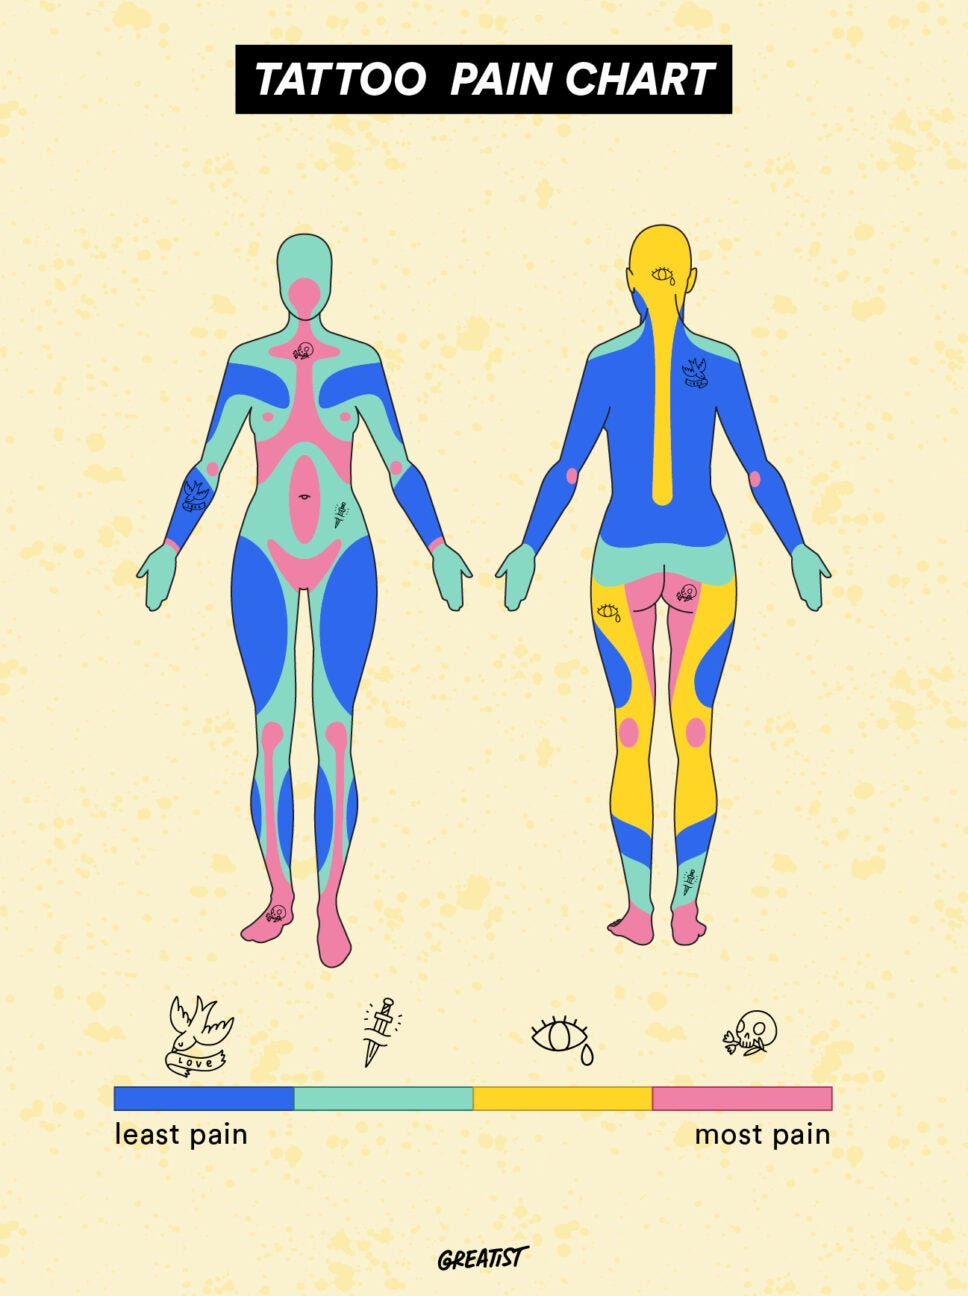 tattoo pain chart for people who are biologically 